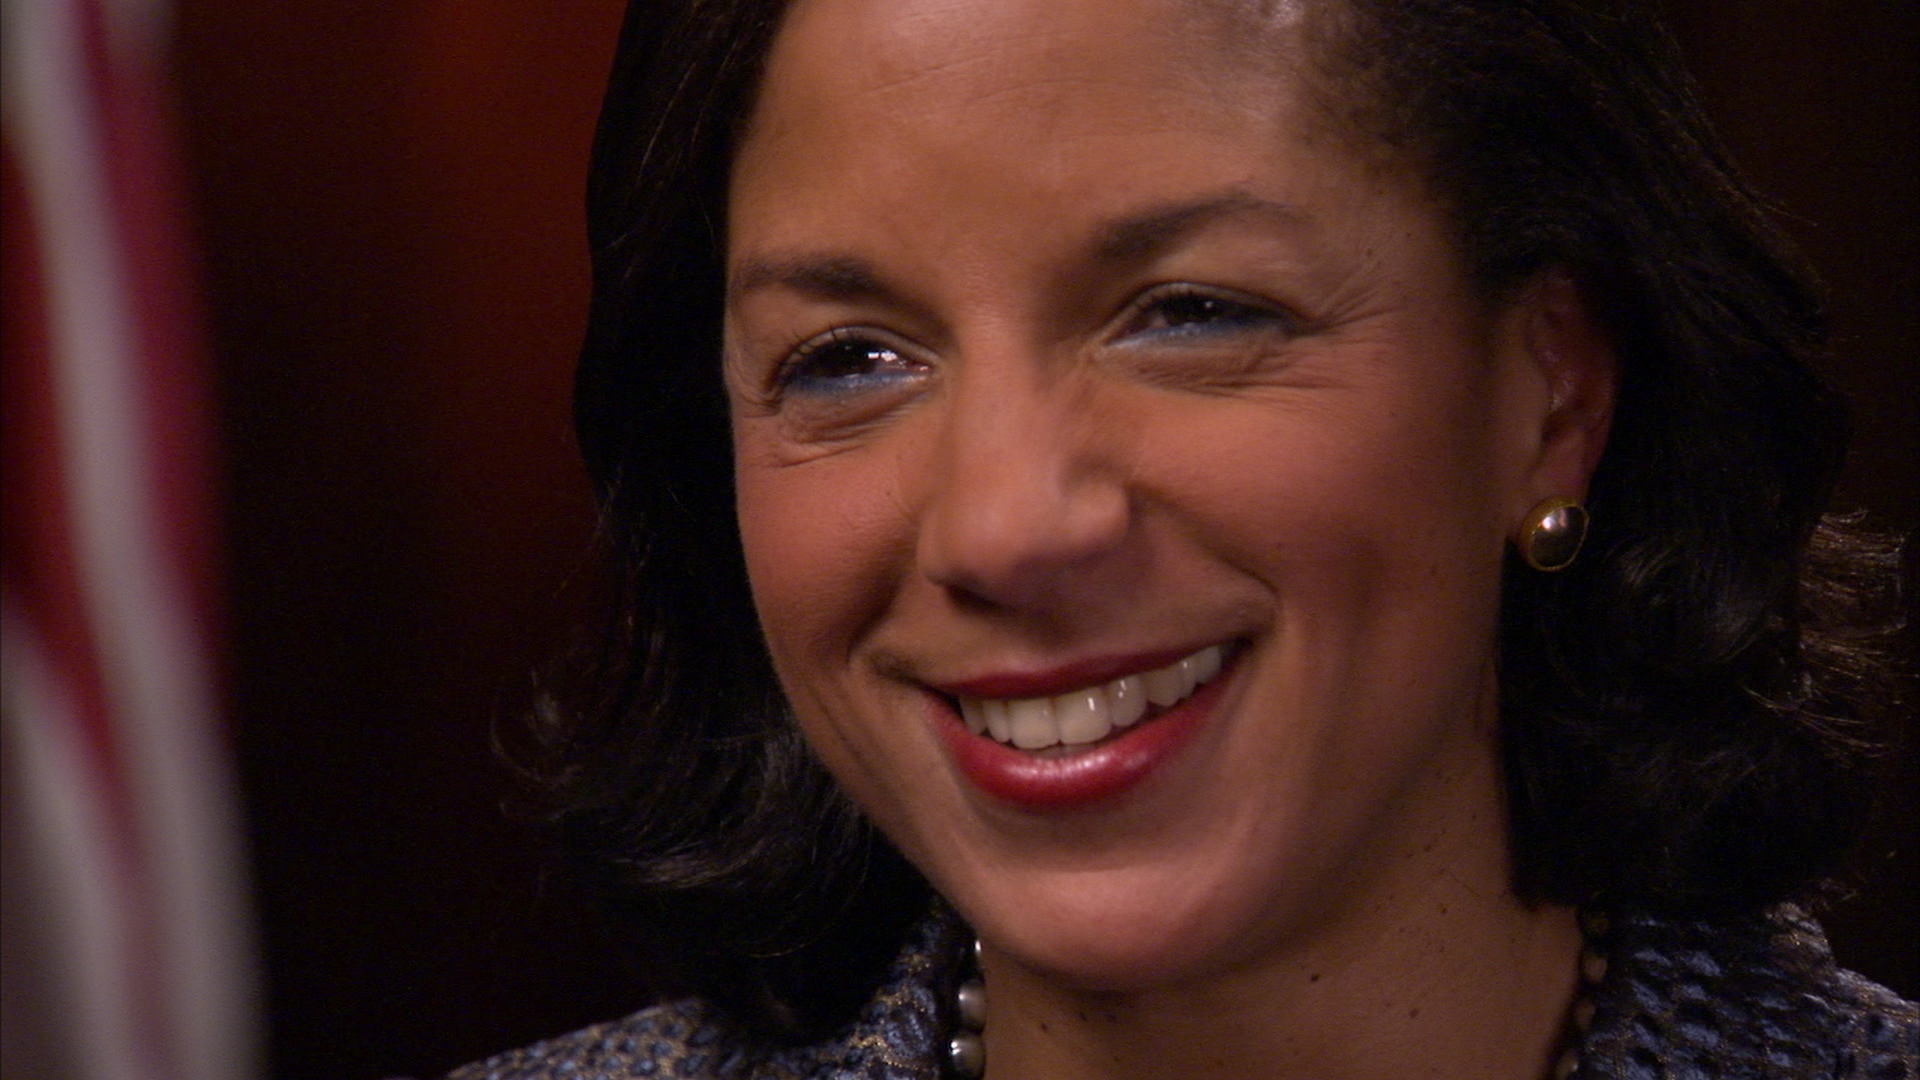 Susan Rice on contending with crisis - CBS News1920 x 1080